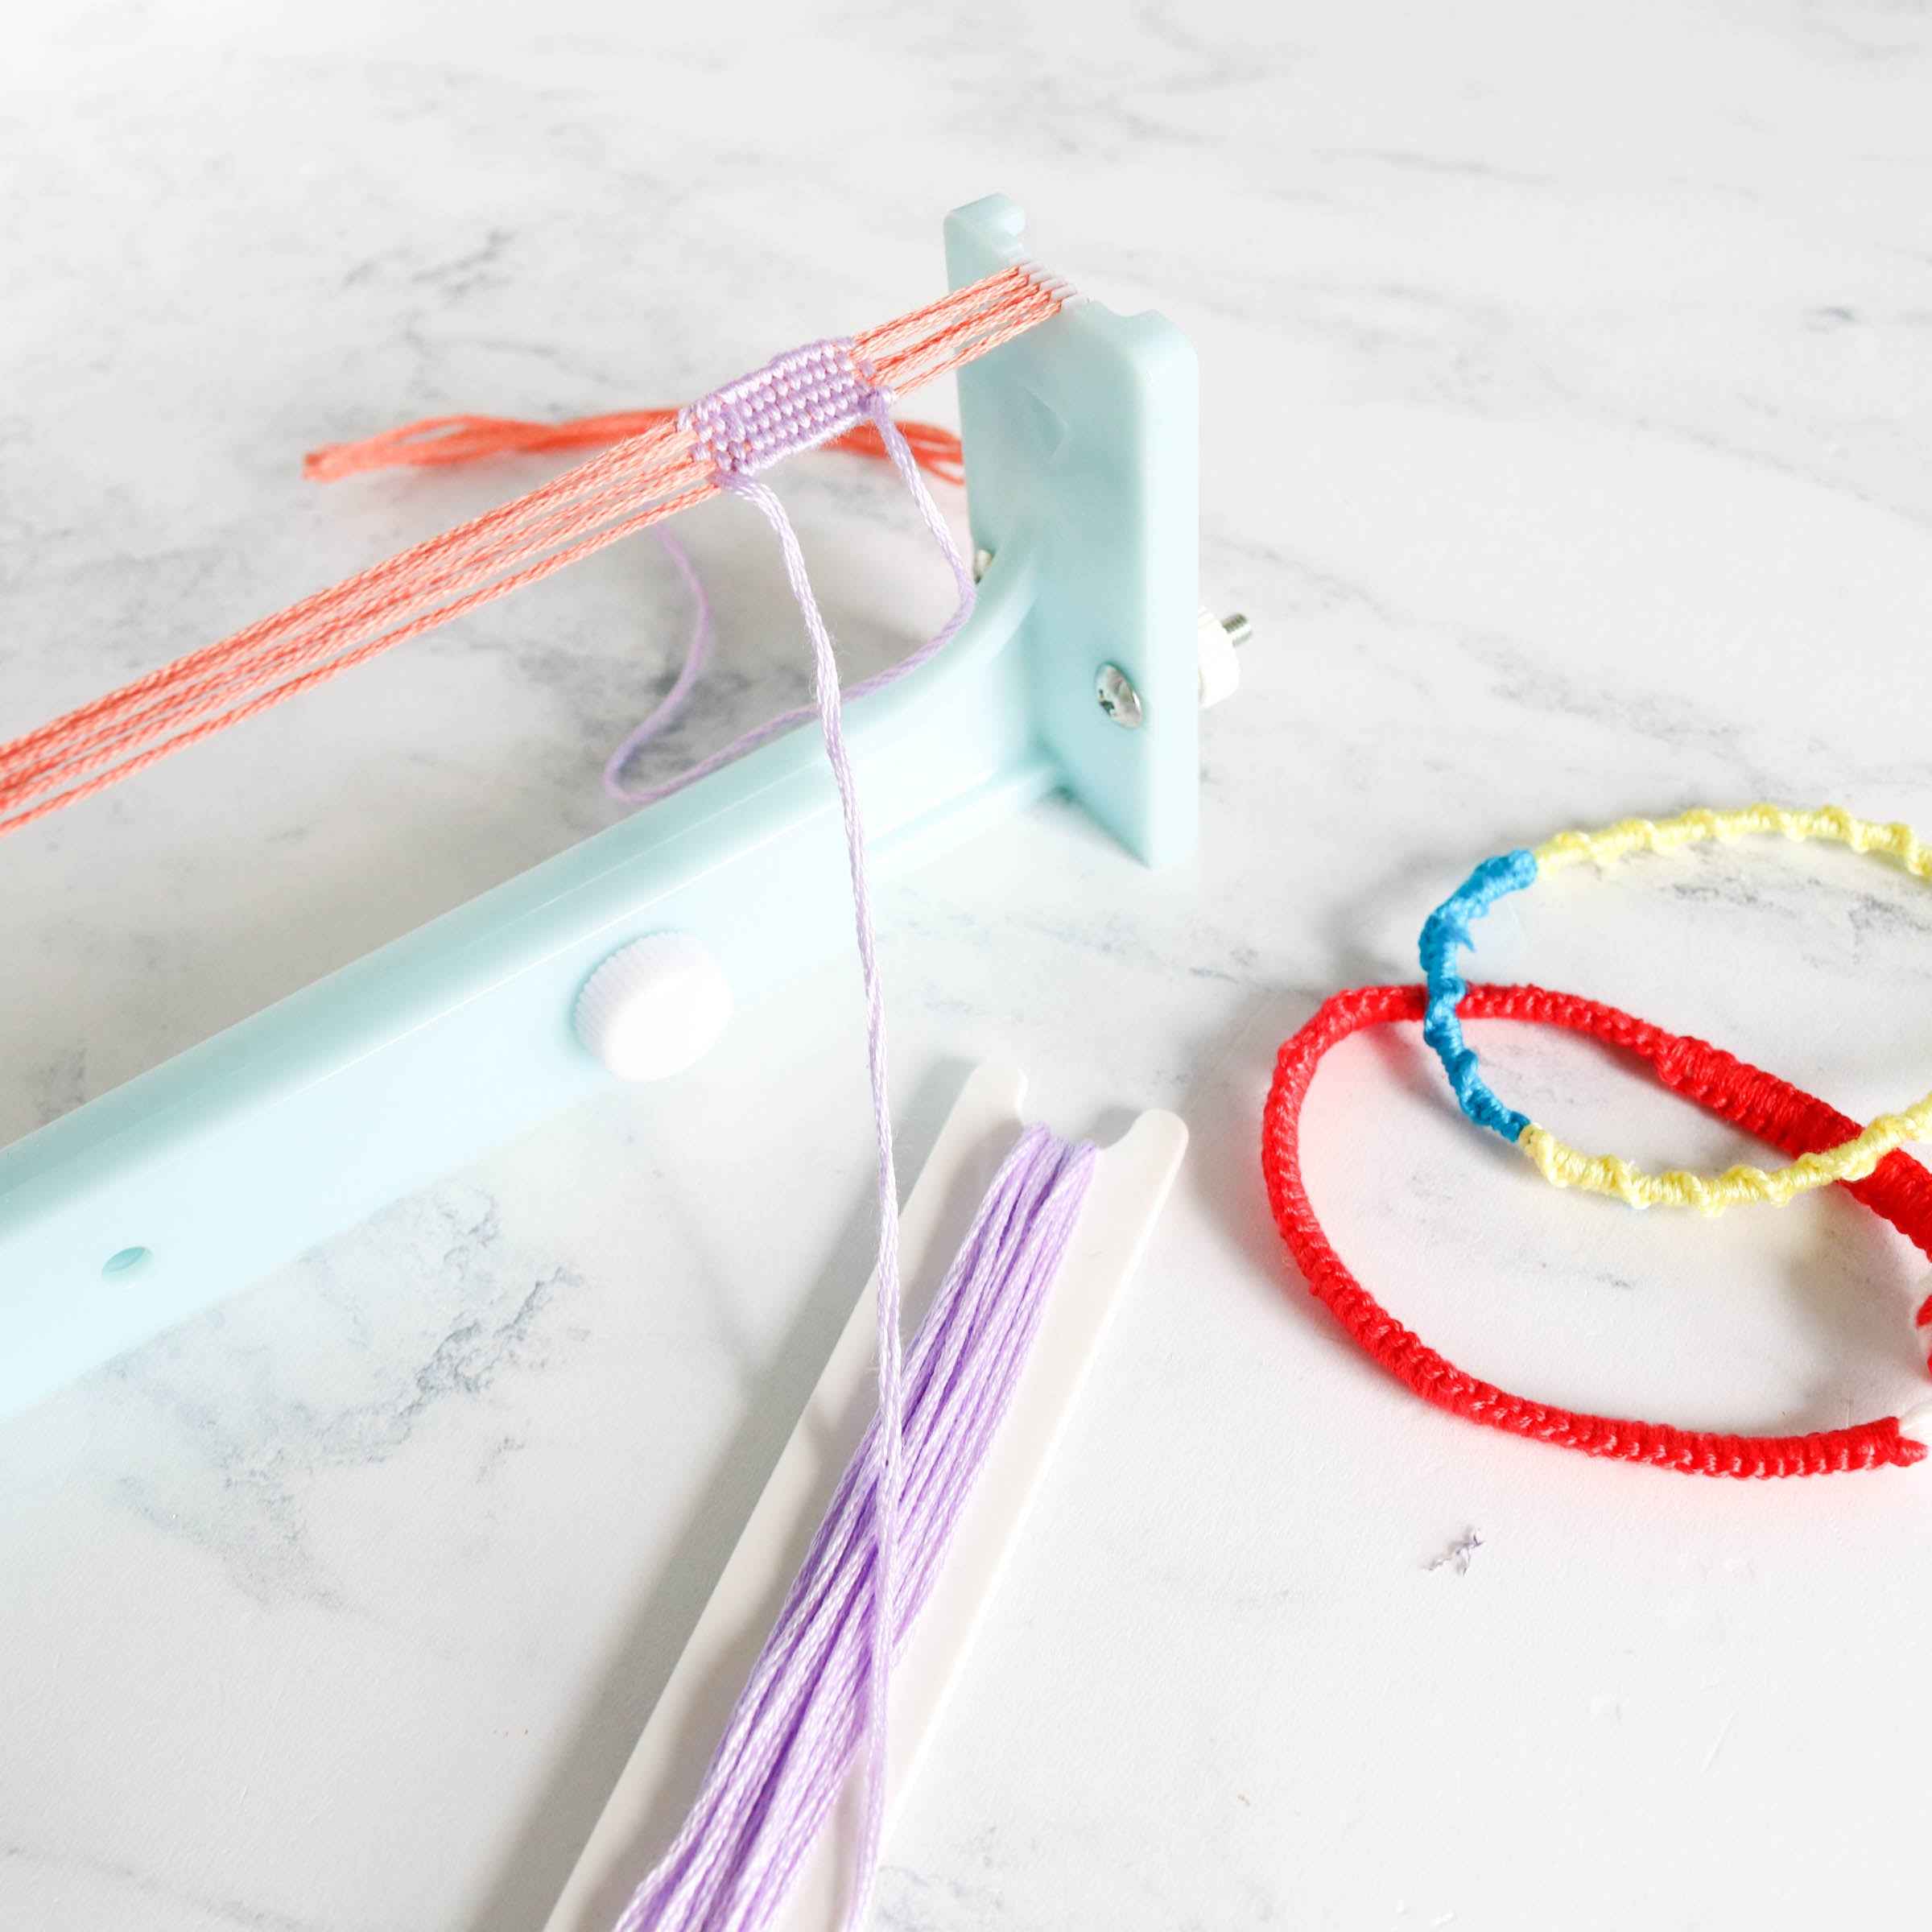 The Digiloom is a new fun weaving toy that lets creativity flow!